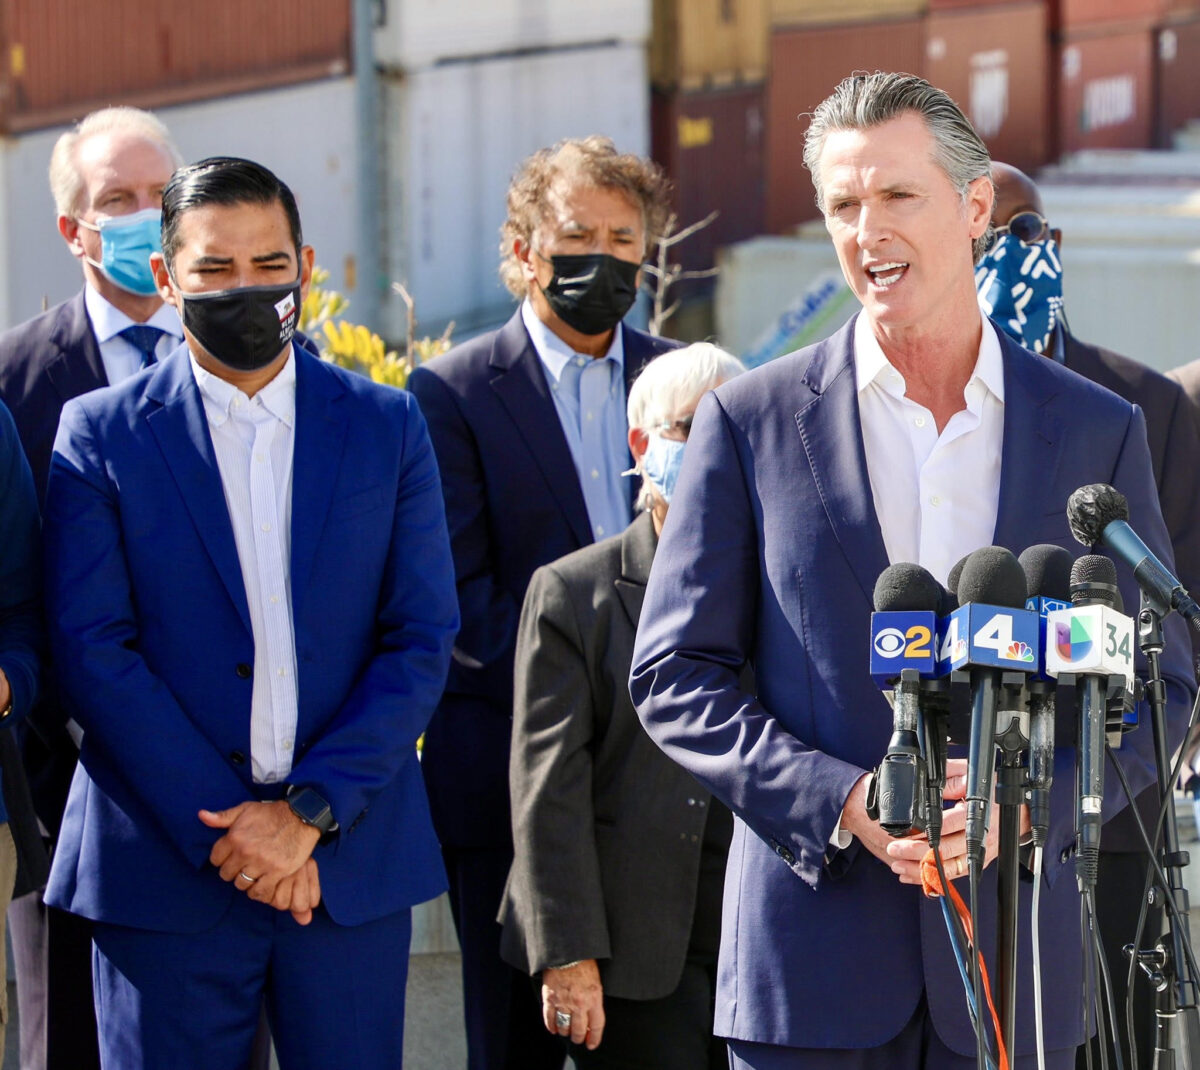 Newsom Warns Against ‘National Anger Machine’ in State of the State Speech